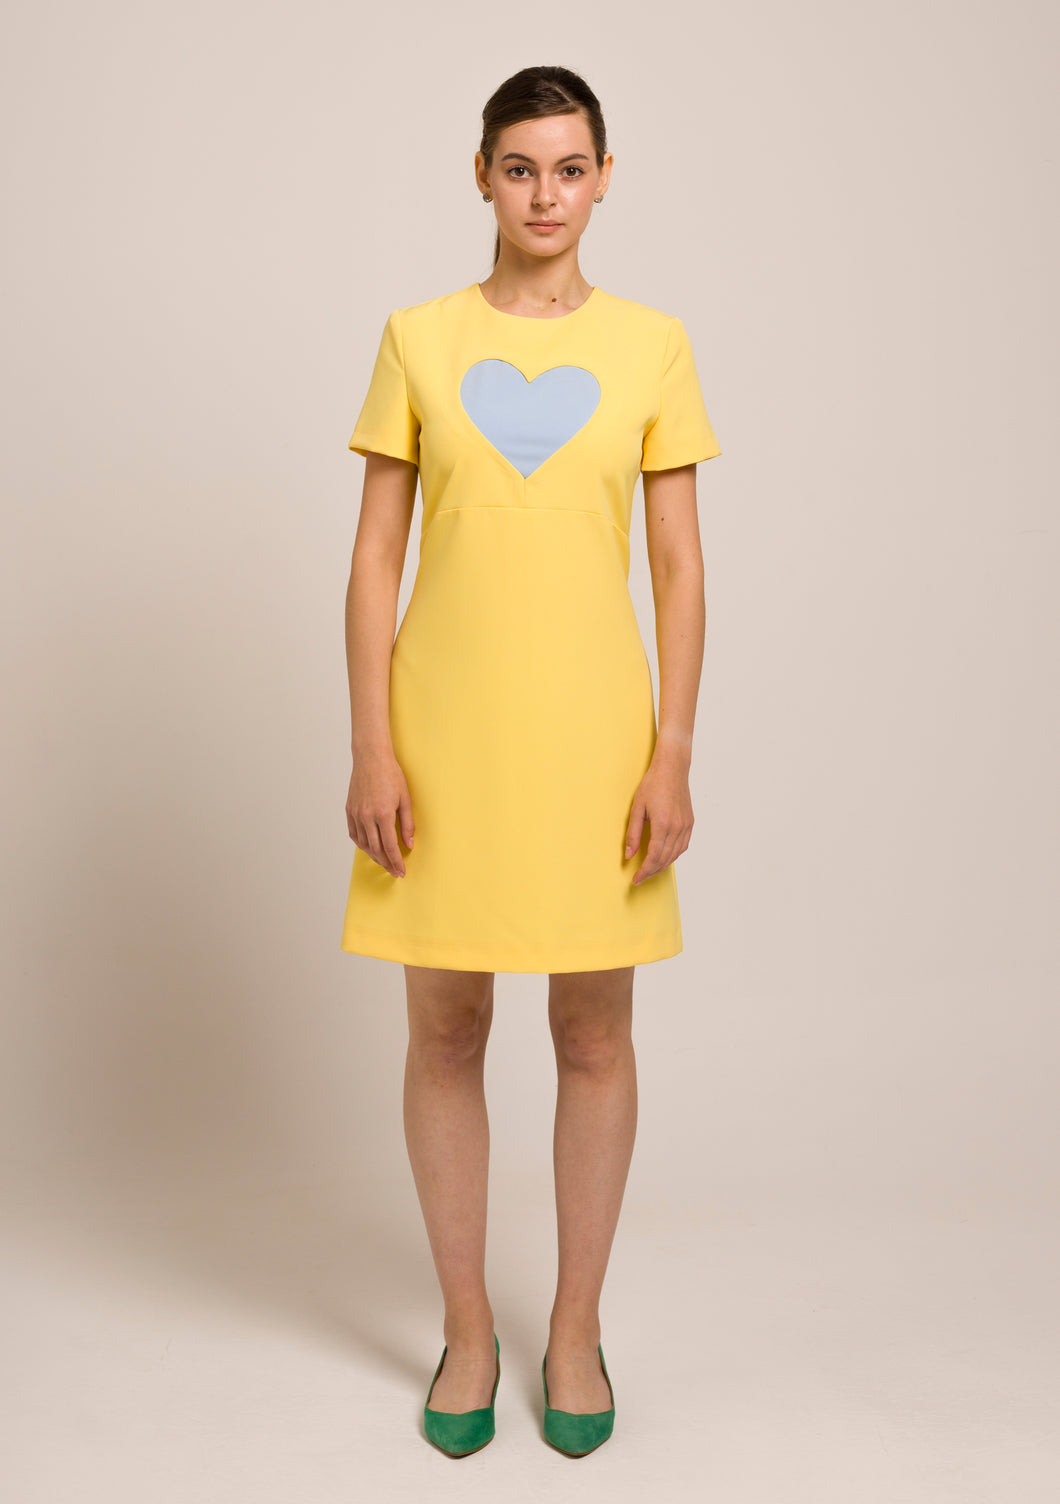 Yellow dress with blue heart